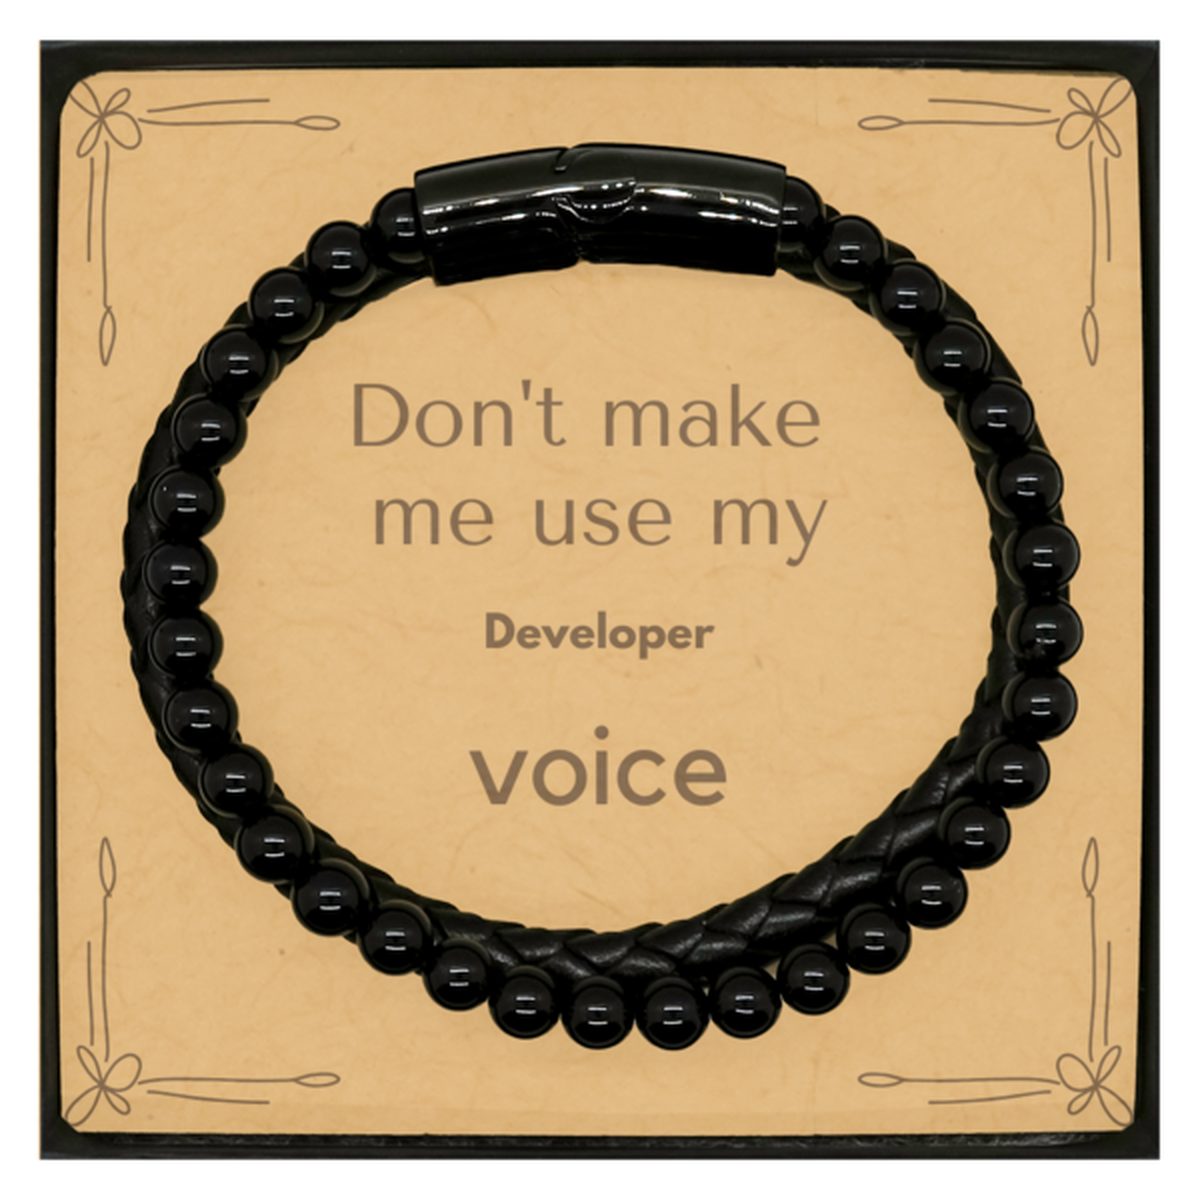 Don't make me use my Developer voice, Sarcasm Developer Card Gifts, Christmas Developer Stone Leather Bracelets Birthday Unique Gifts For Developer Coworkers, Men, Women, Colleague, Friends